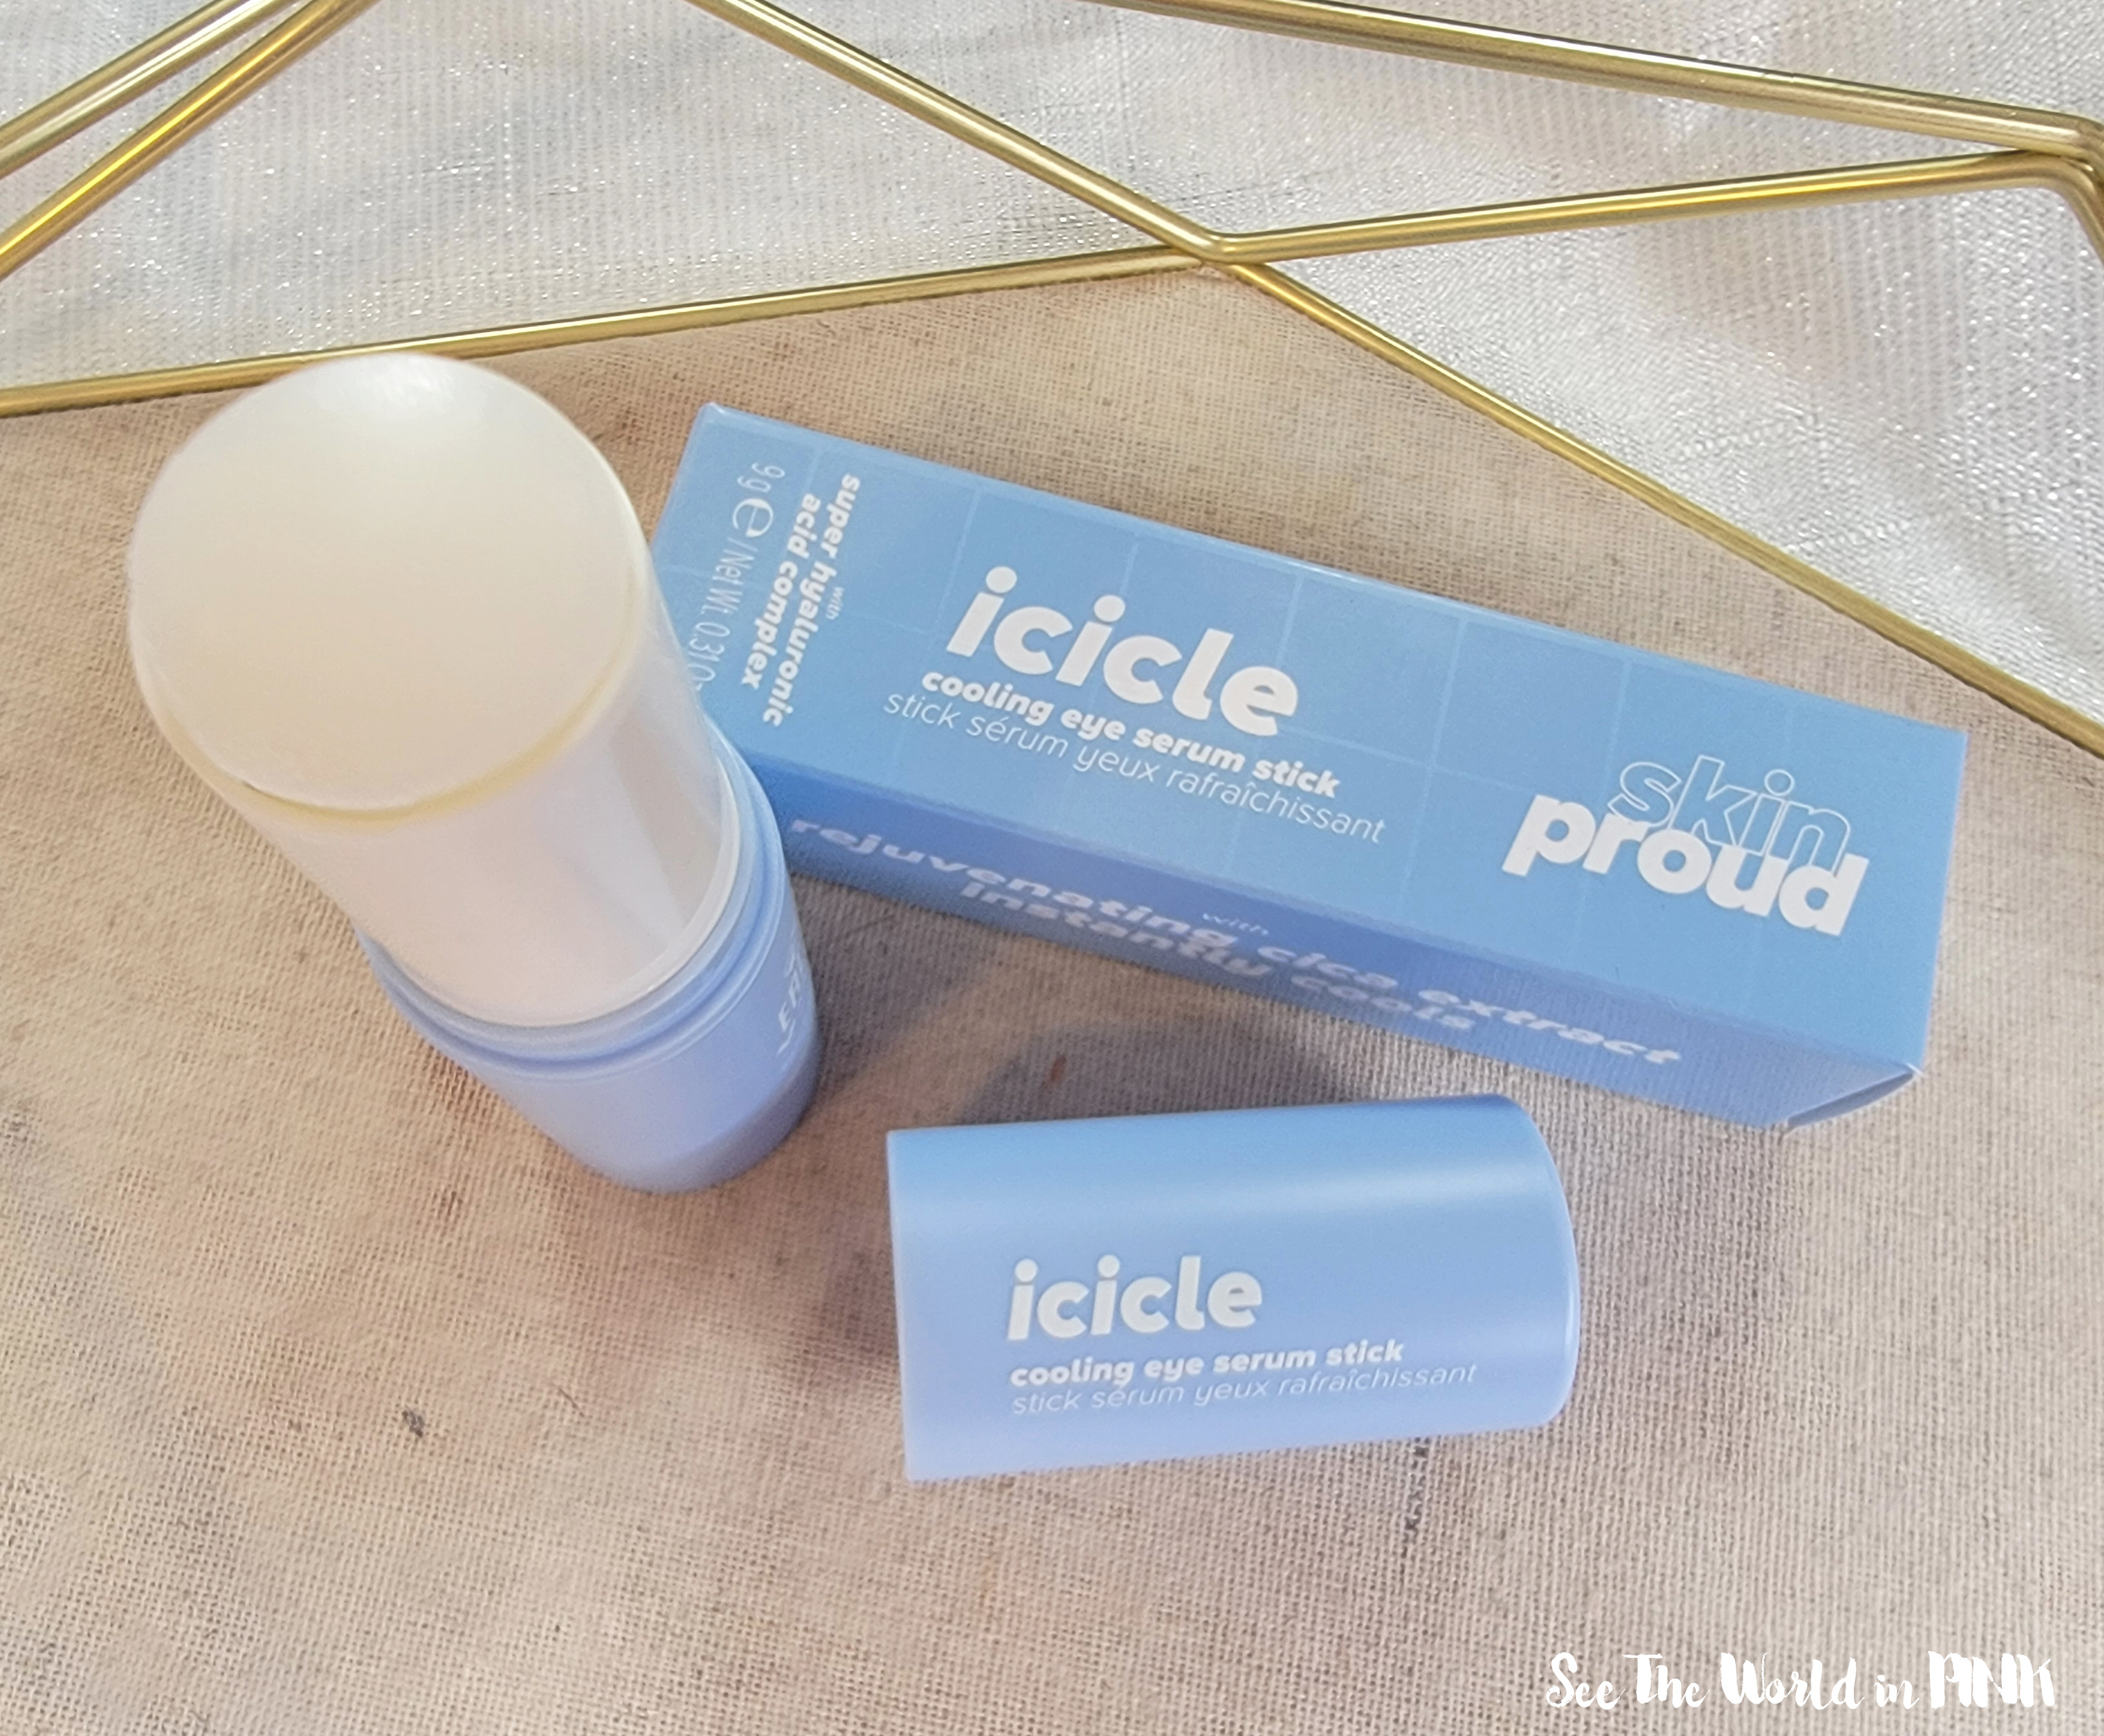 Skin Proud - New Face Melt and Icicle Review